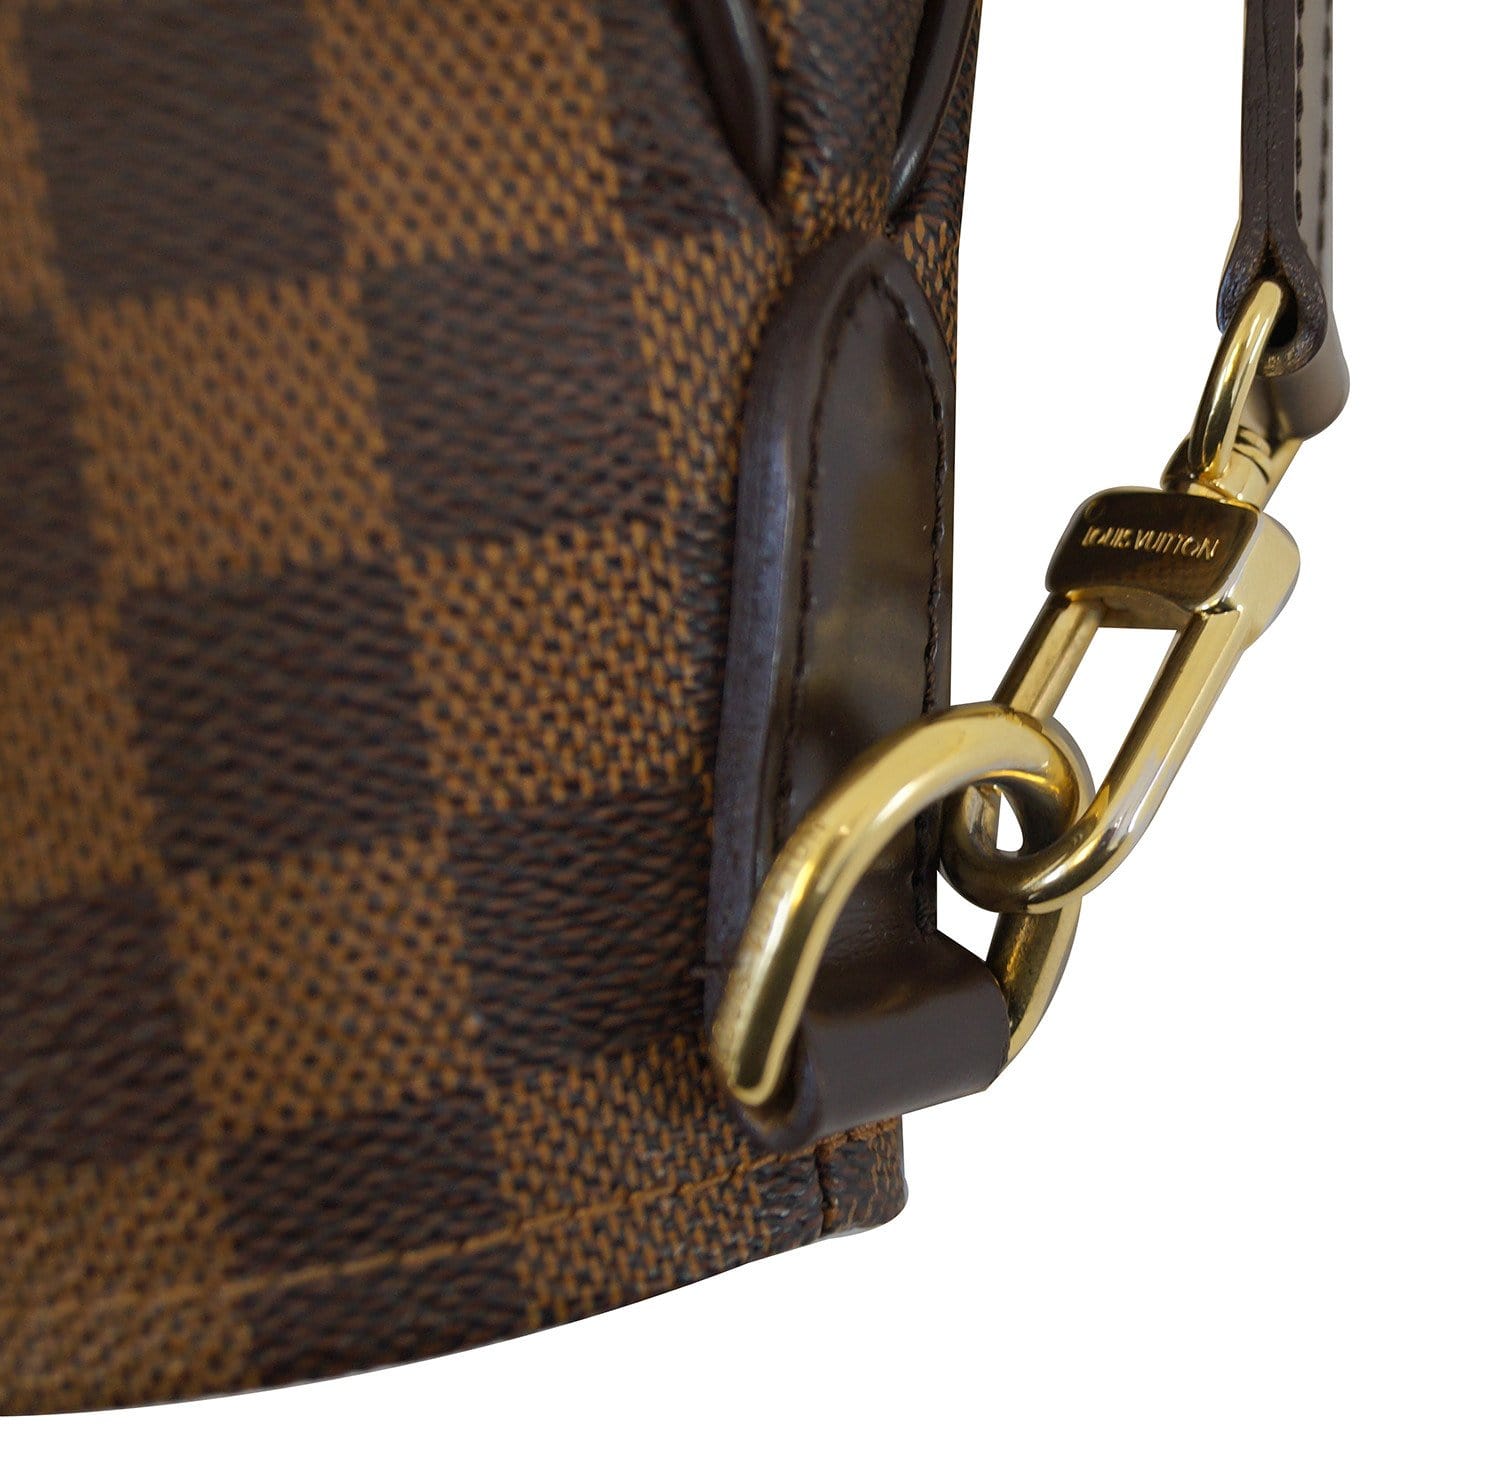 Authentic Louis Vuitton Canvas Cabas Rosebery Two Way Tote in Damier Ebene